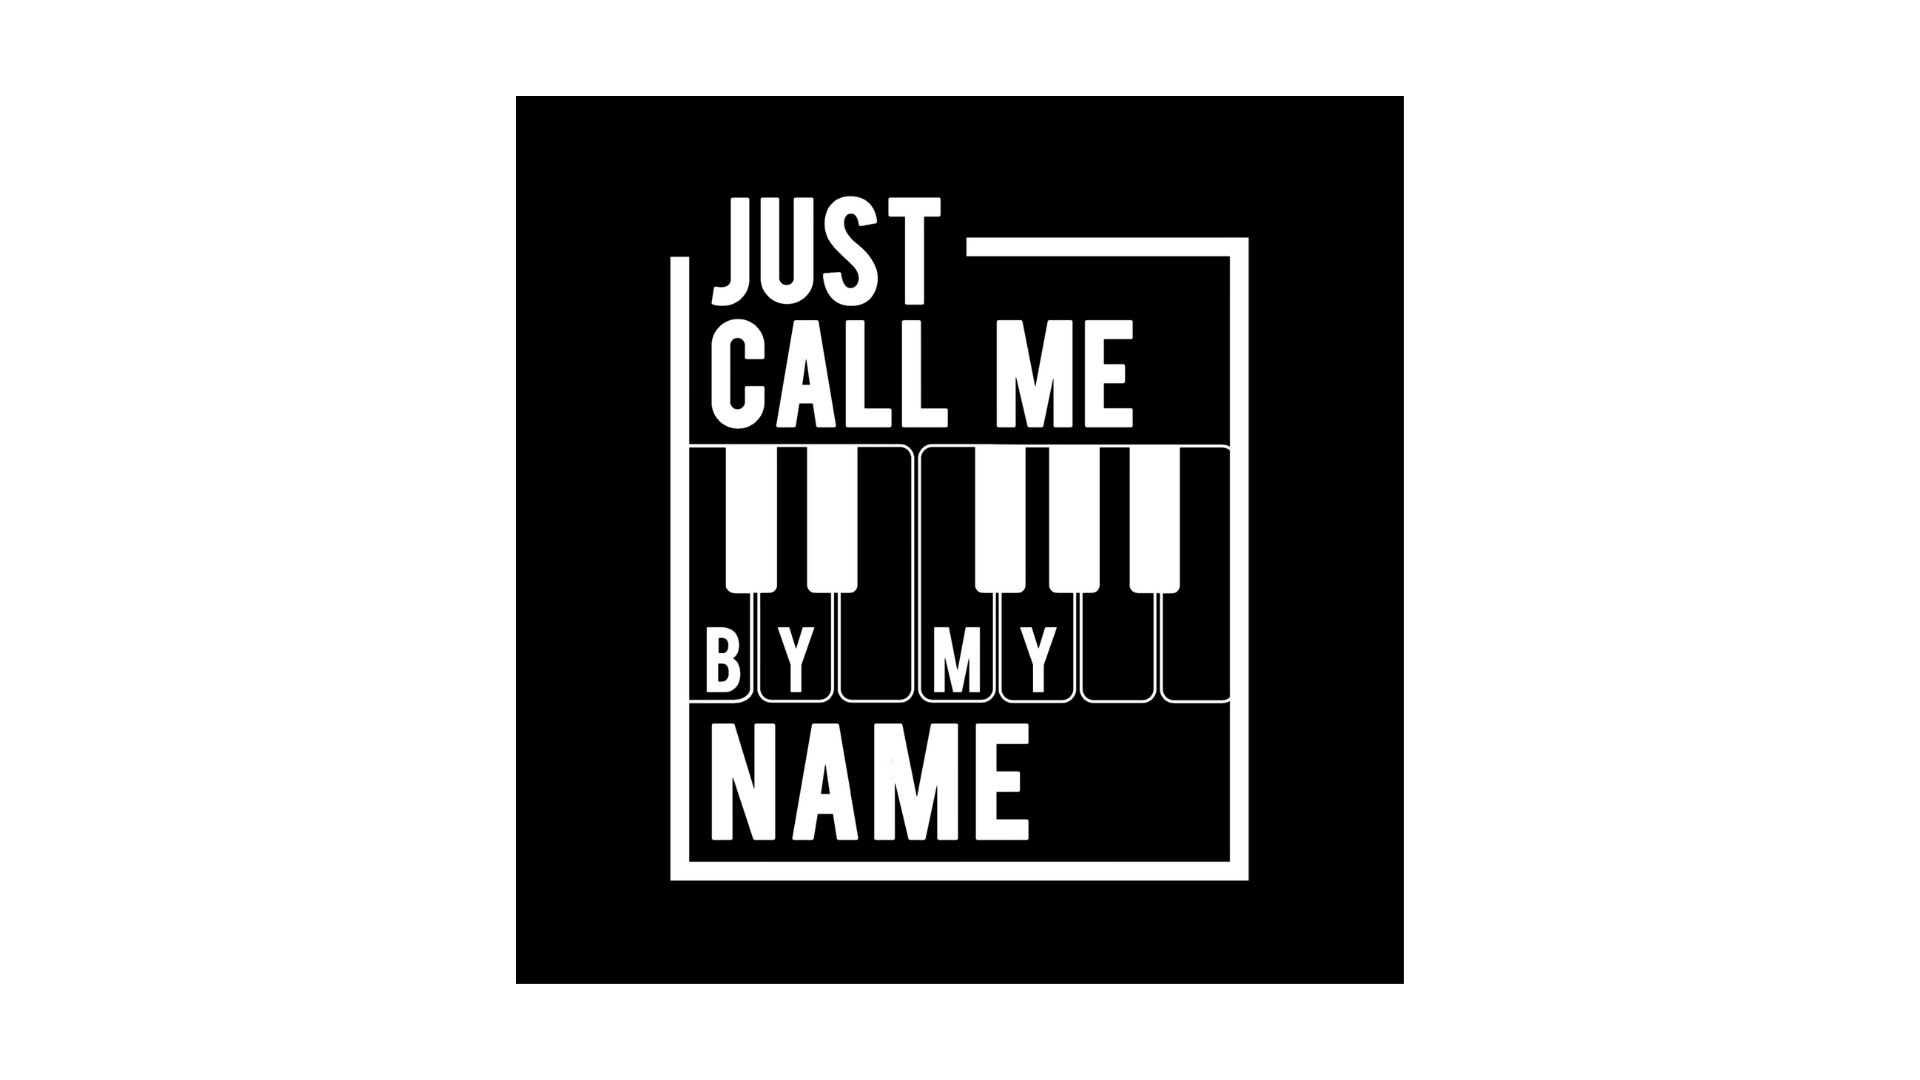 Text Just Call Me By My Name in white block font over black background.